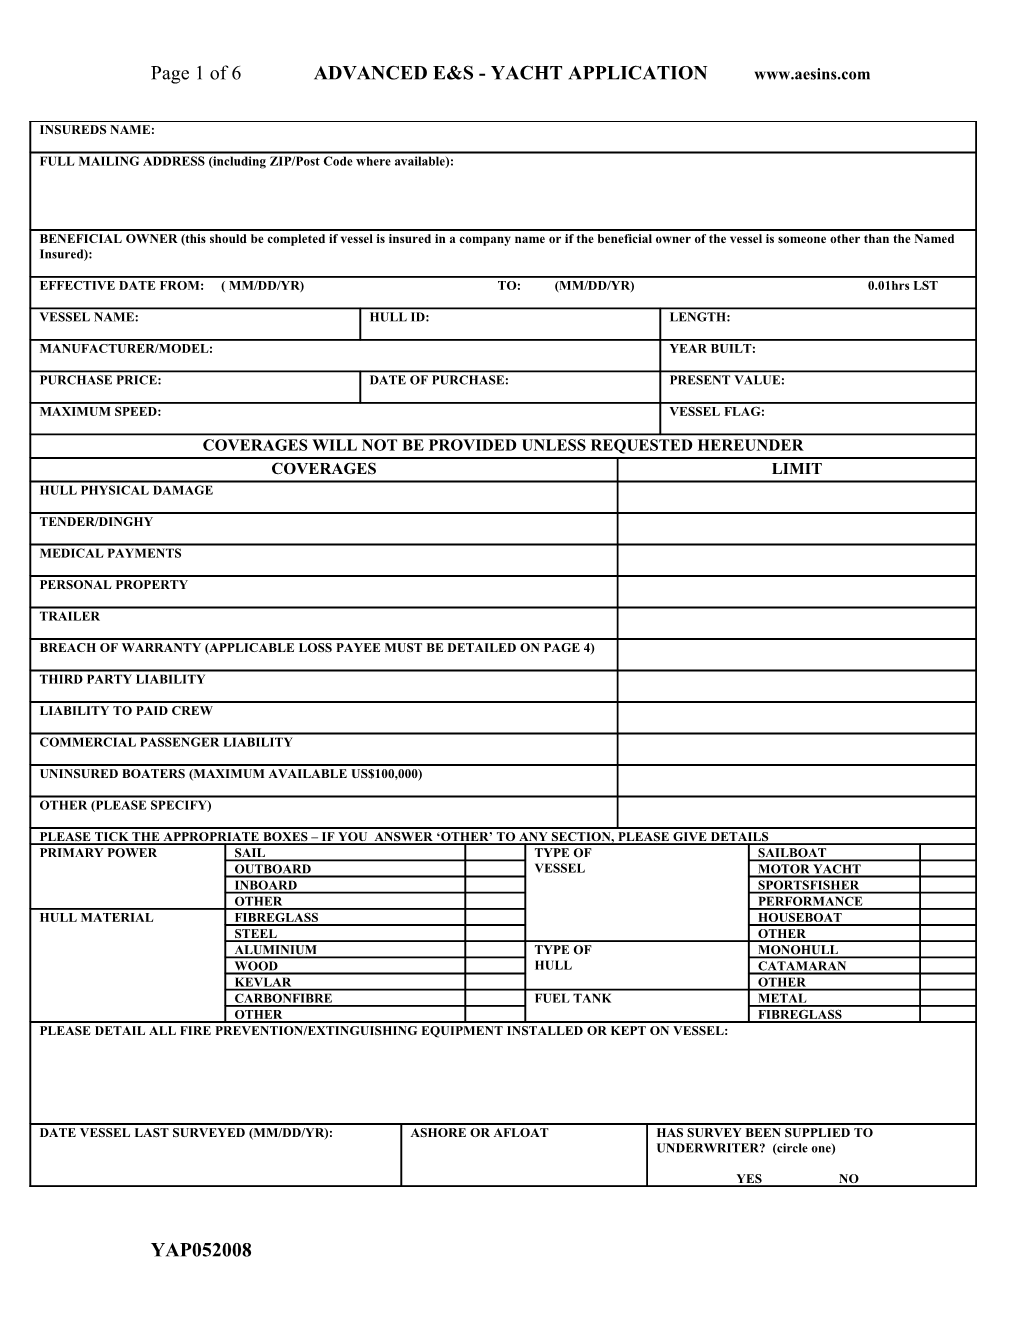 Page 1 of 5 ADVANCED E&S - YACHT APPLICATION